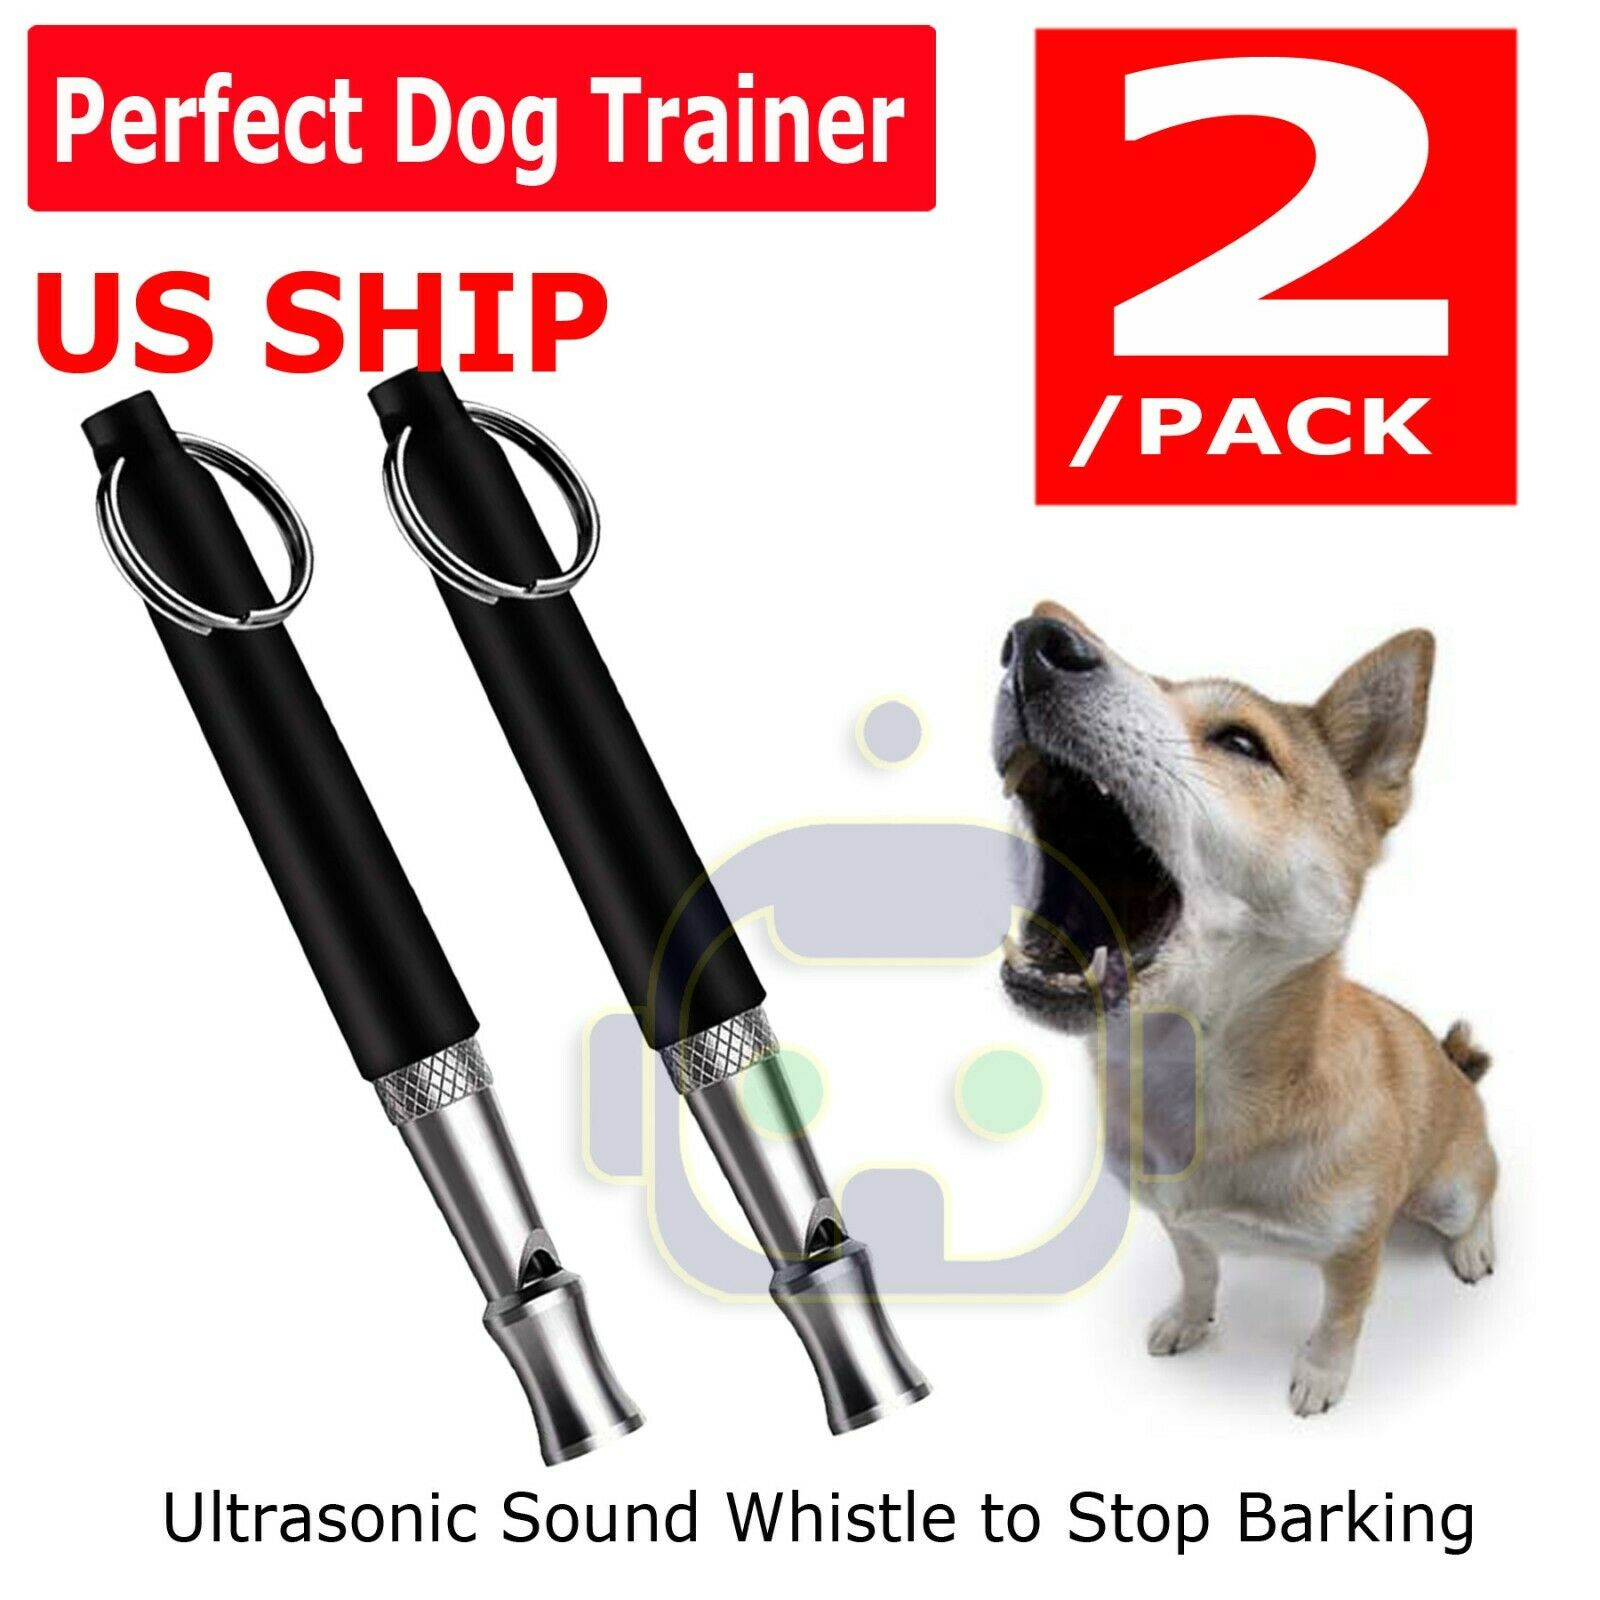 2pc Dog Training Whistle Ultrasonic Obedience Stop Barking Pet Sound Pitch Black